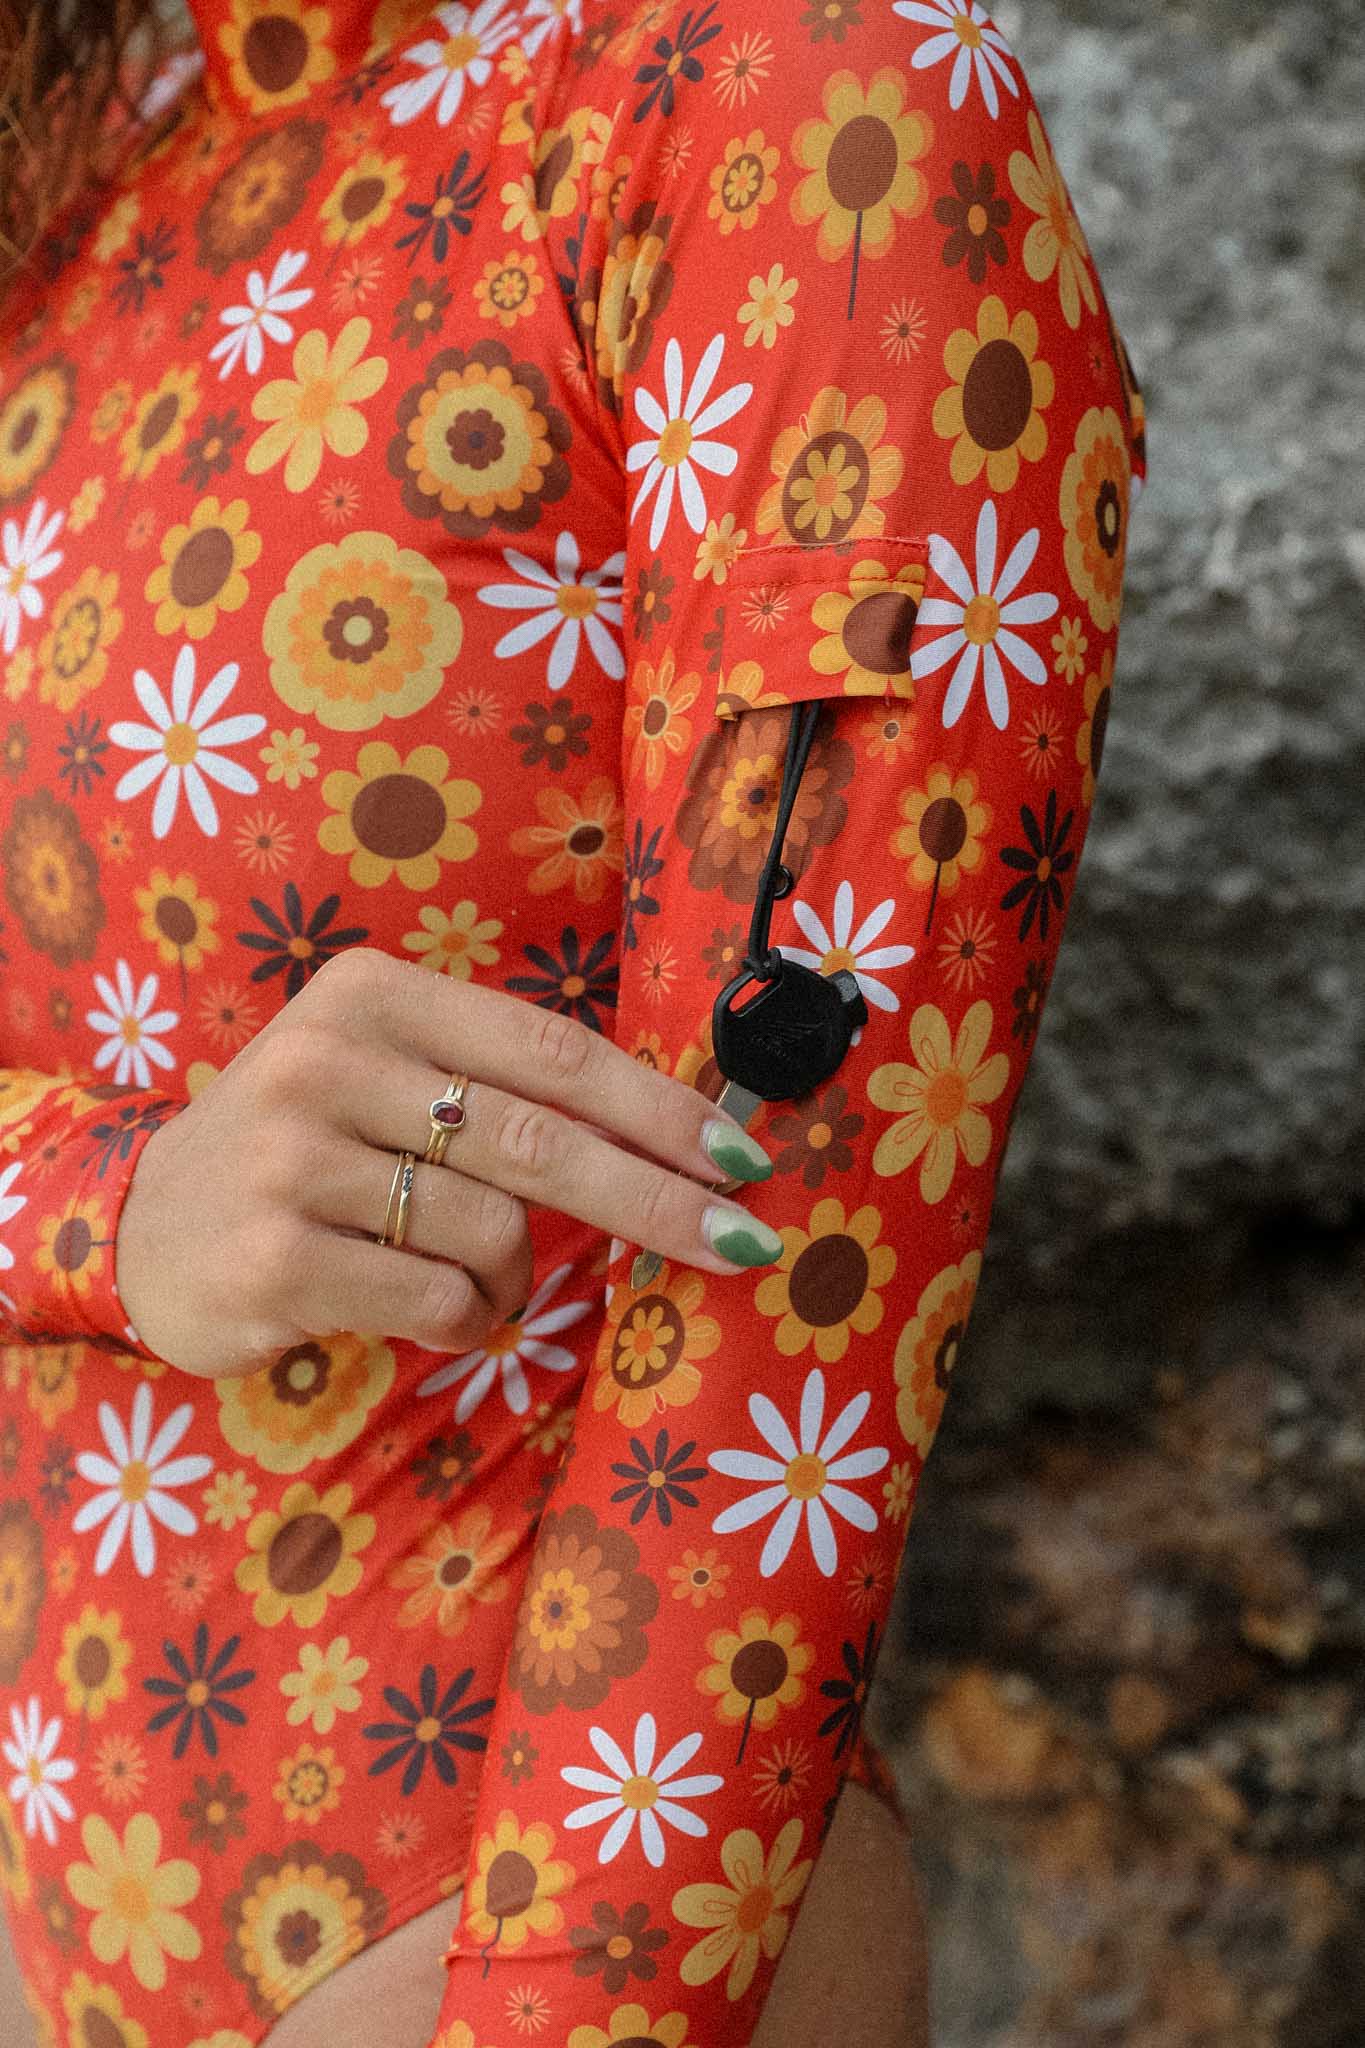 Model holding the key that is hanging on a key loop of her surf suit in retro floral print